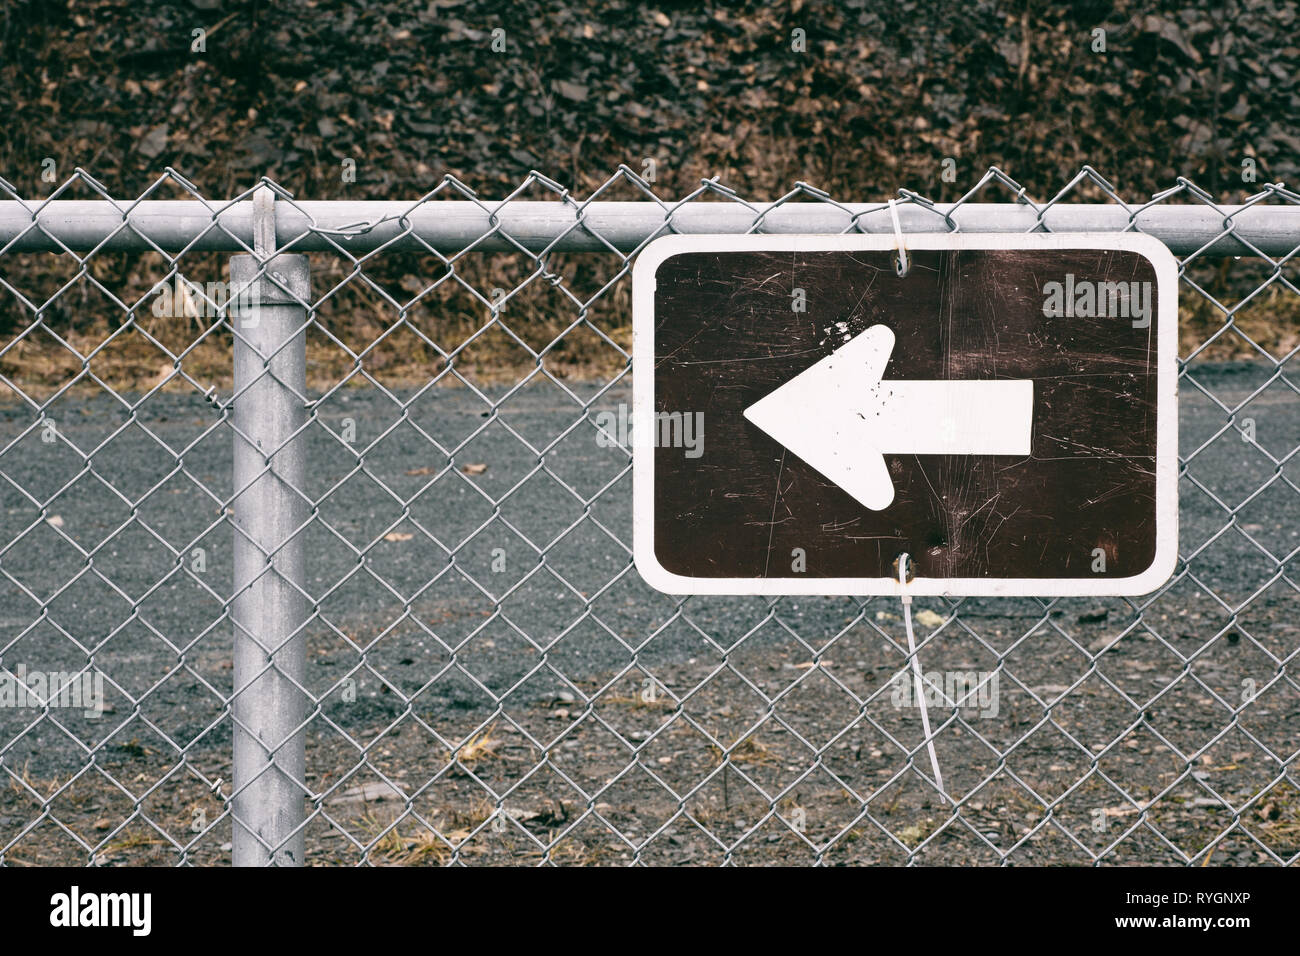 Arrow symbol direction sign on chain link fence. Stock Photo